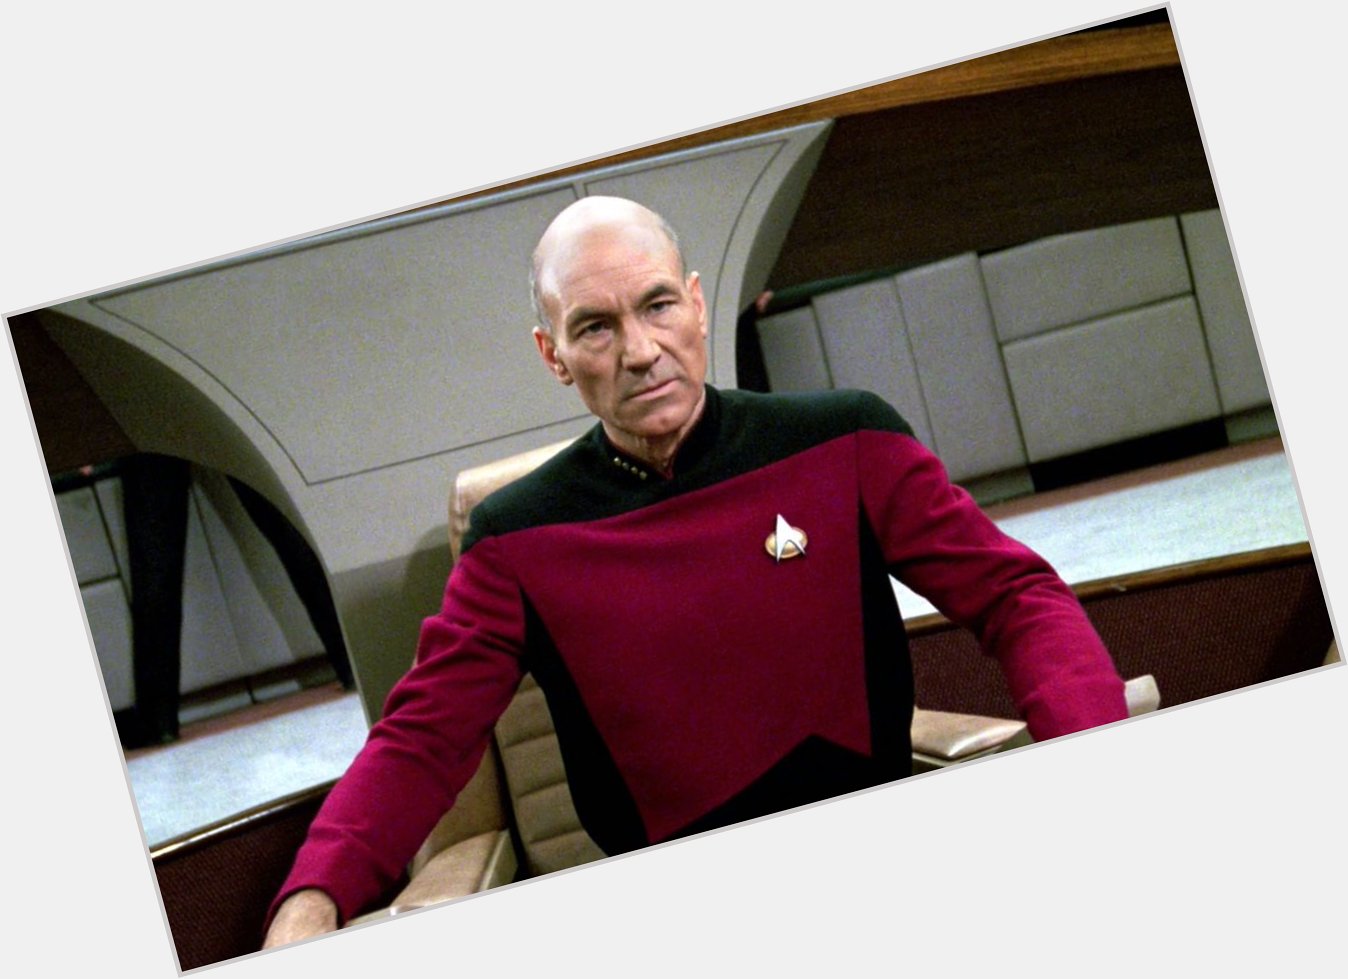 EVERYONE SAY HAPPY BIRTHDAY TO SIR PATRICK STEWART!!! HES A ROLE MODEL!!! 